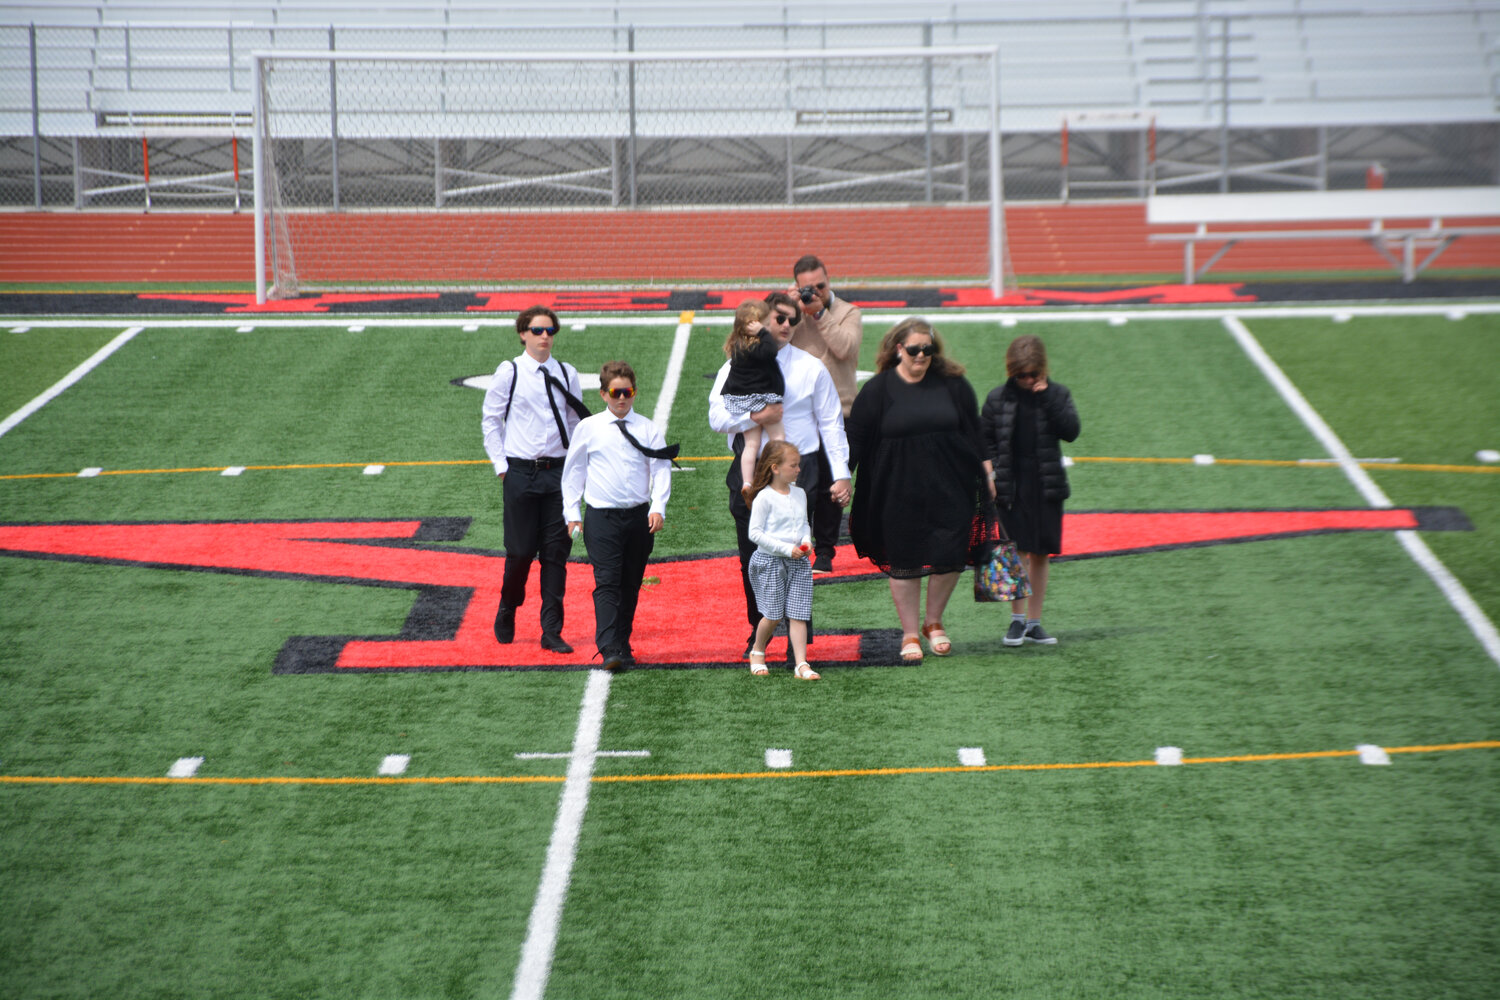 The Jemtegaard family leaves the field after they placed roses in honor of their late father and husband.